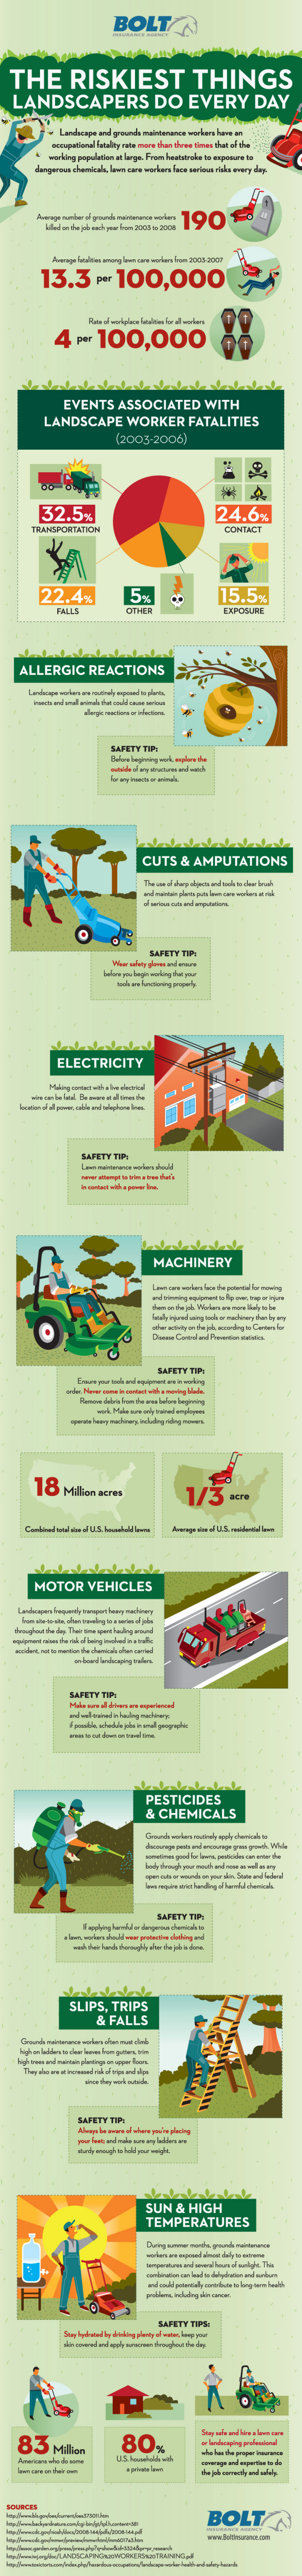 Riskiest Things Landscapers Do Every Day Infographic